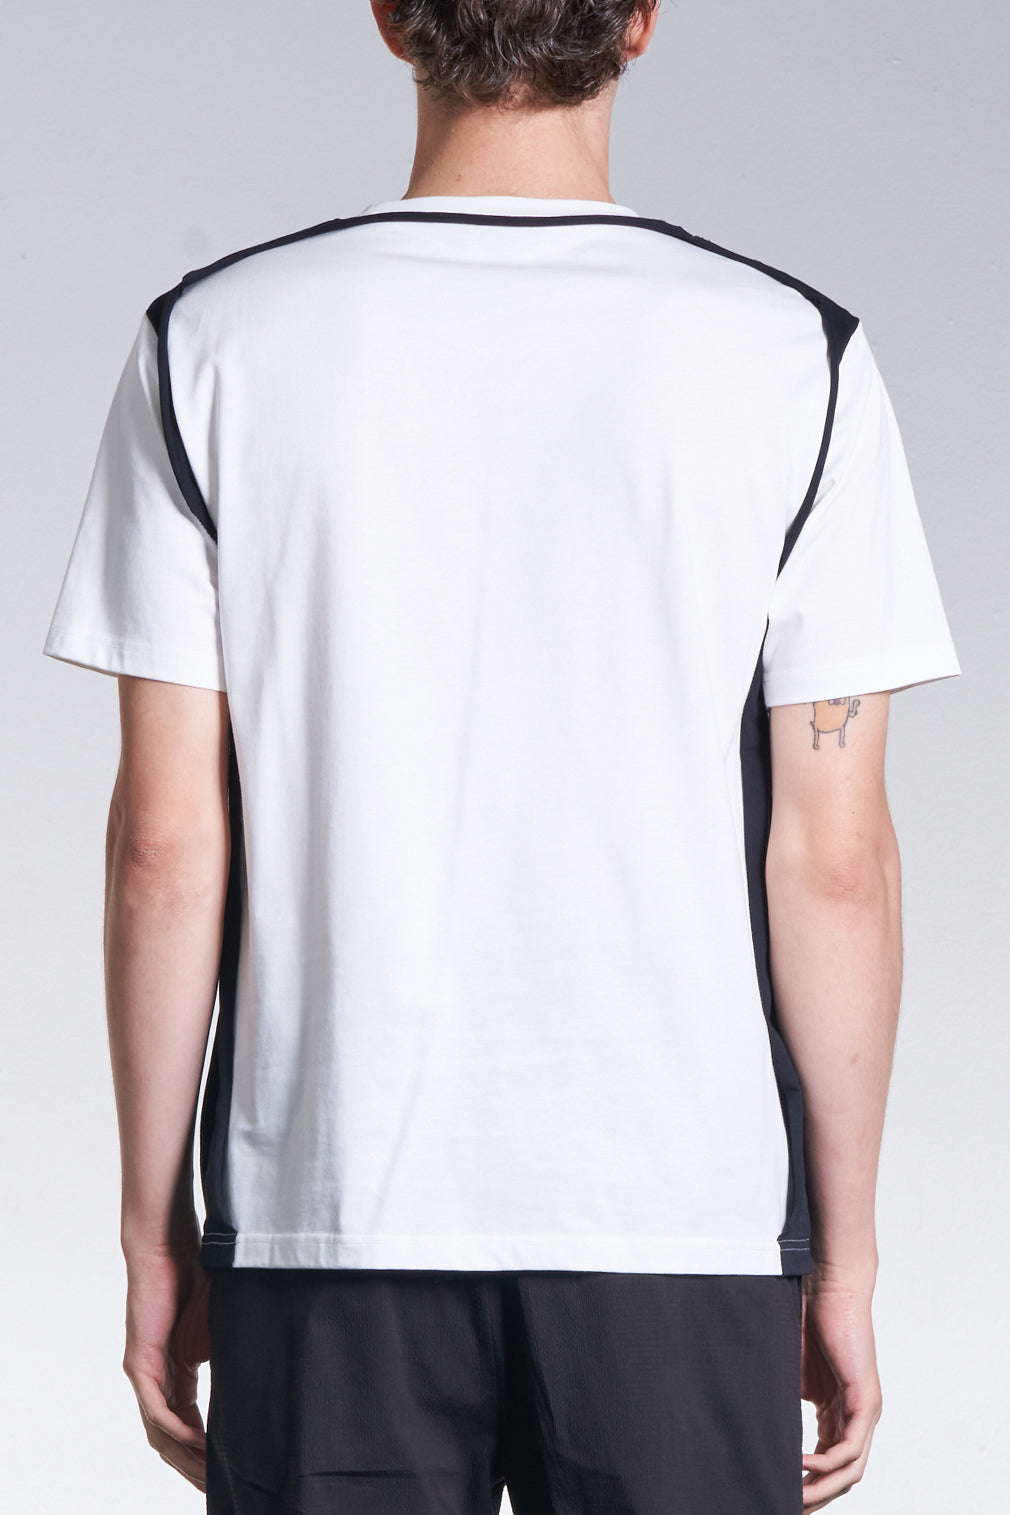 Shadow Cut Out Tee